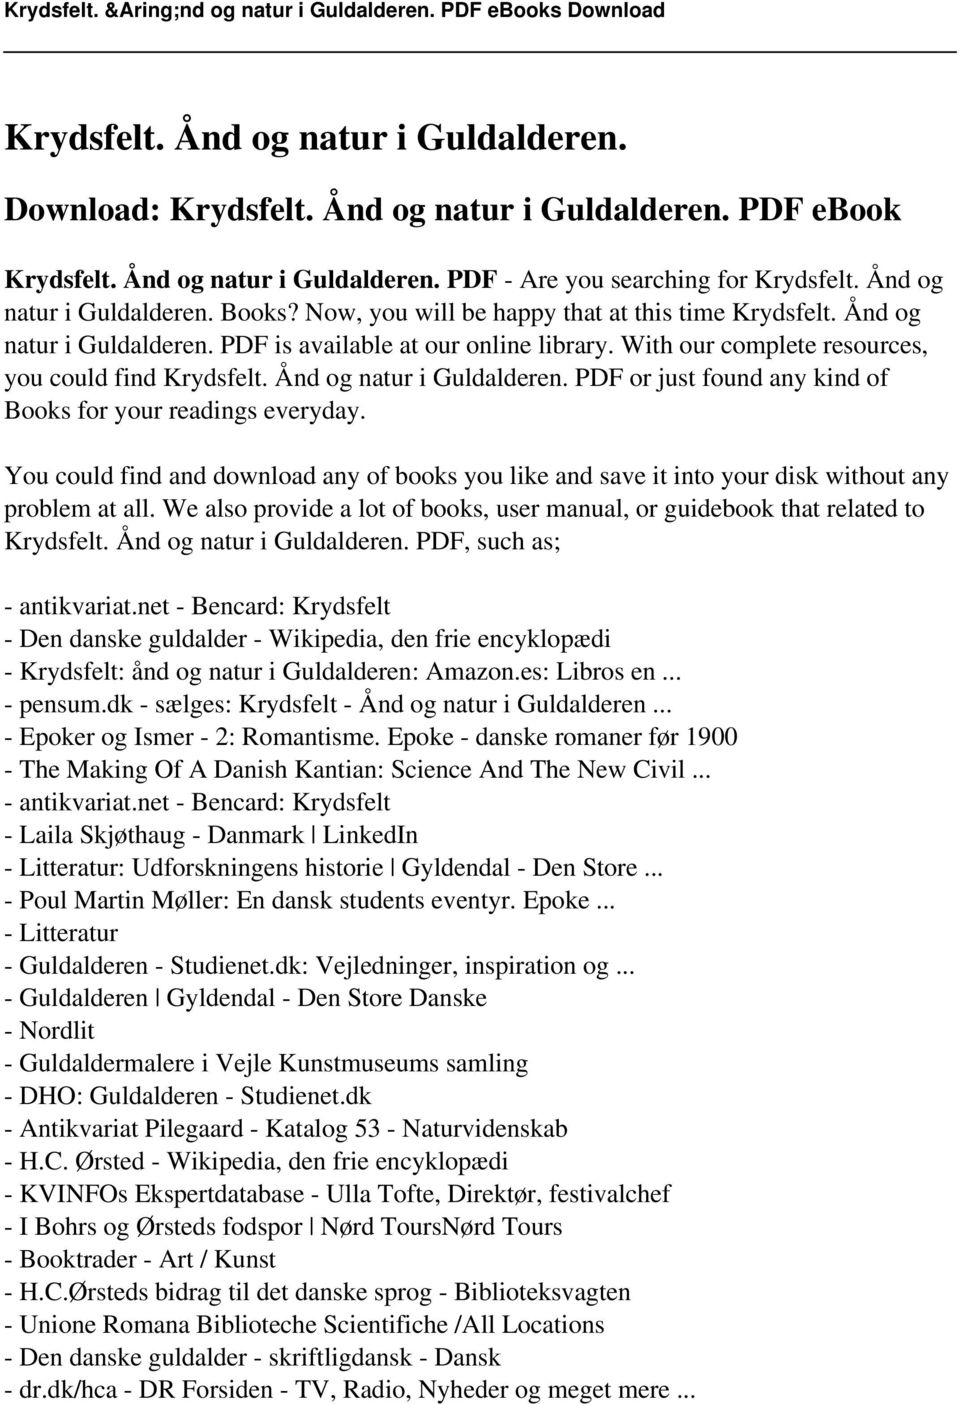 With our complete resources, you could find Krydsfelt. Ånd og natur i Guldalderen. PDF or just found any kind of Books for your readings everyday.